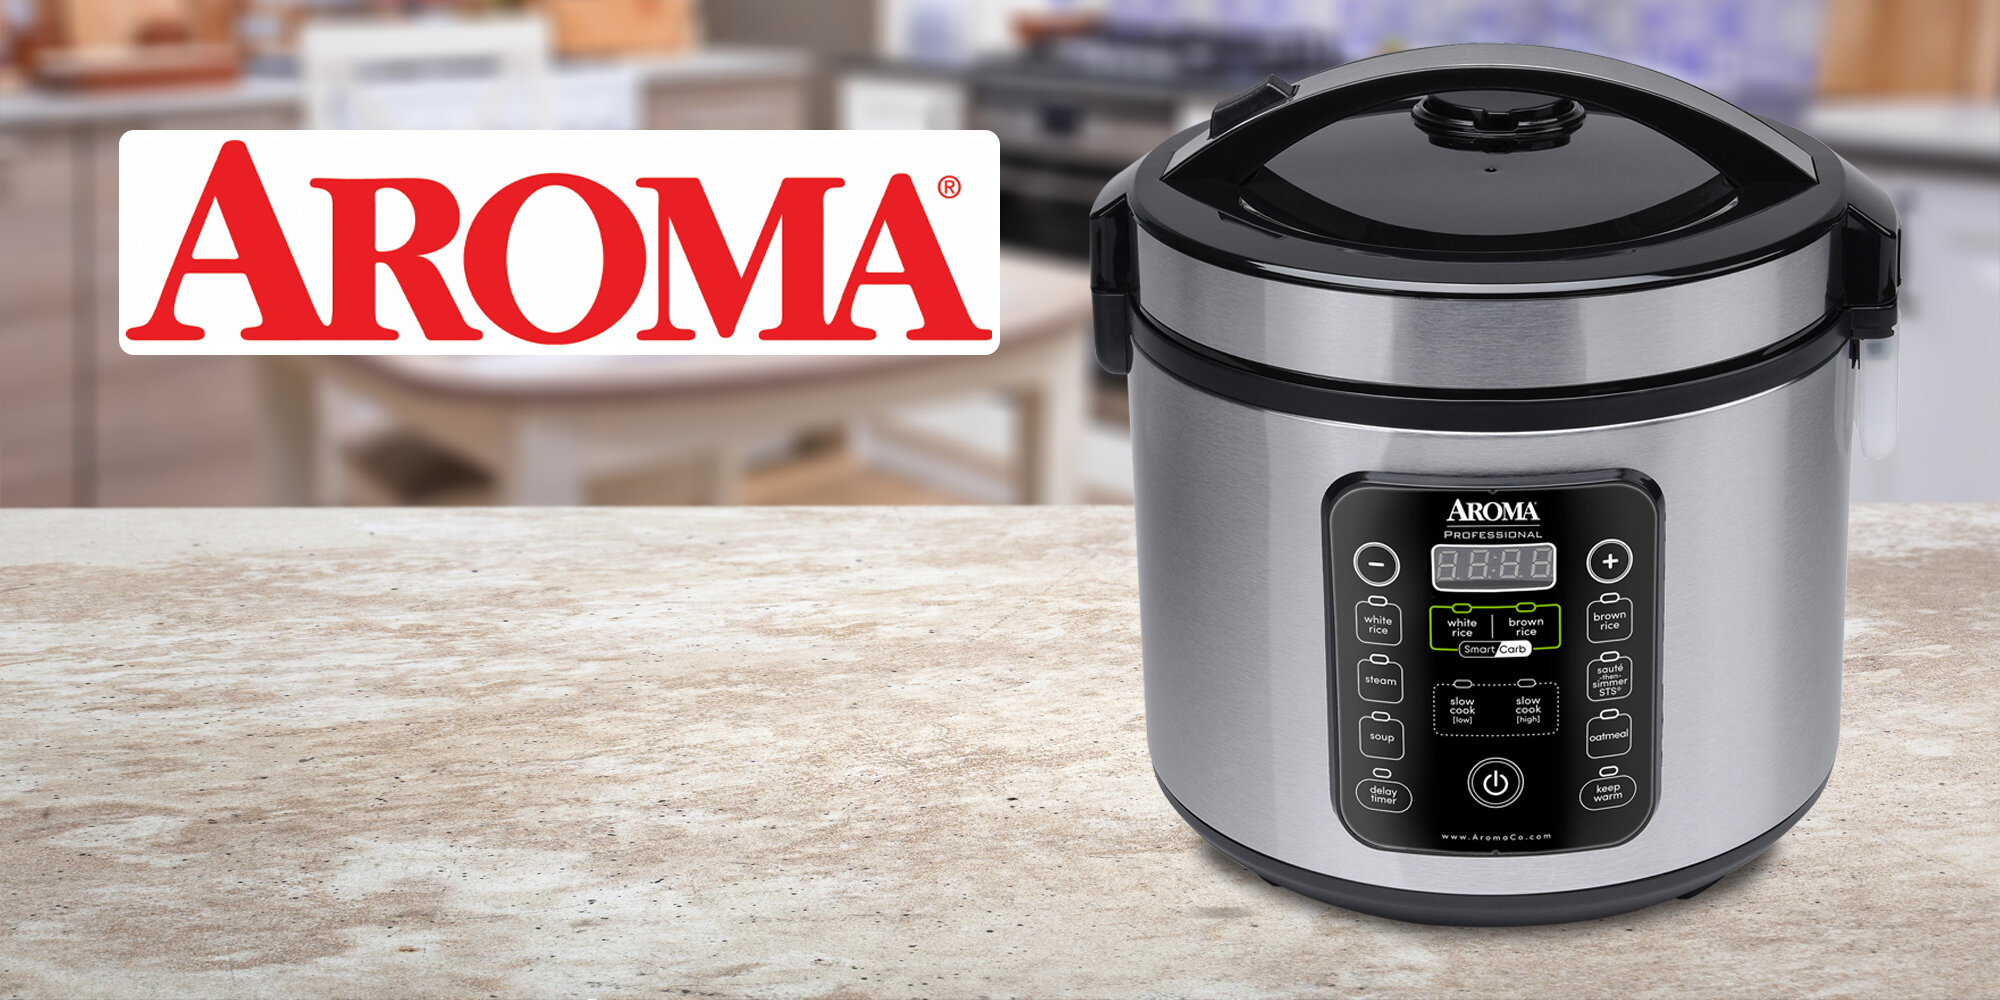 Aroma 20-Cup Smart Carb Rice Cooker 